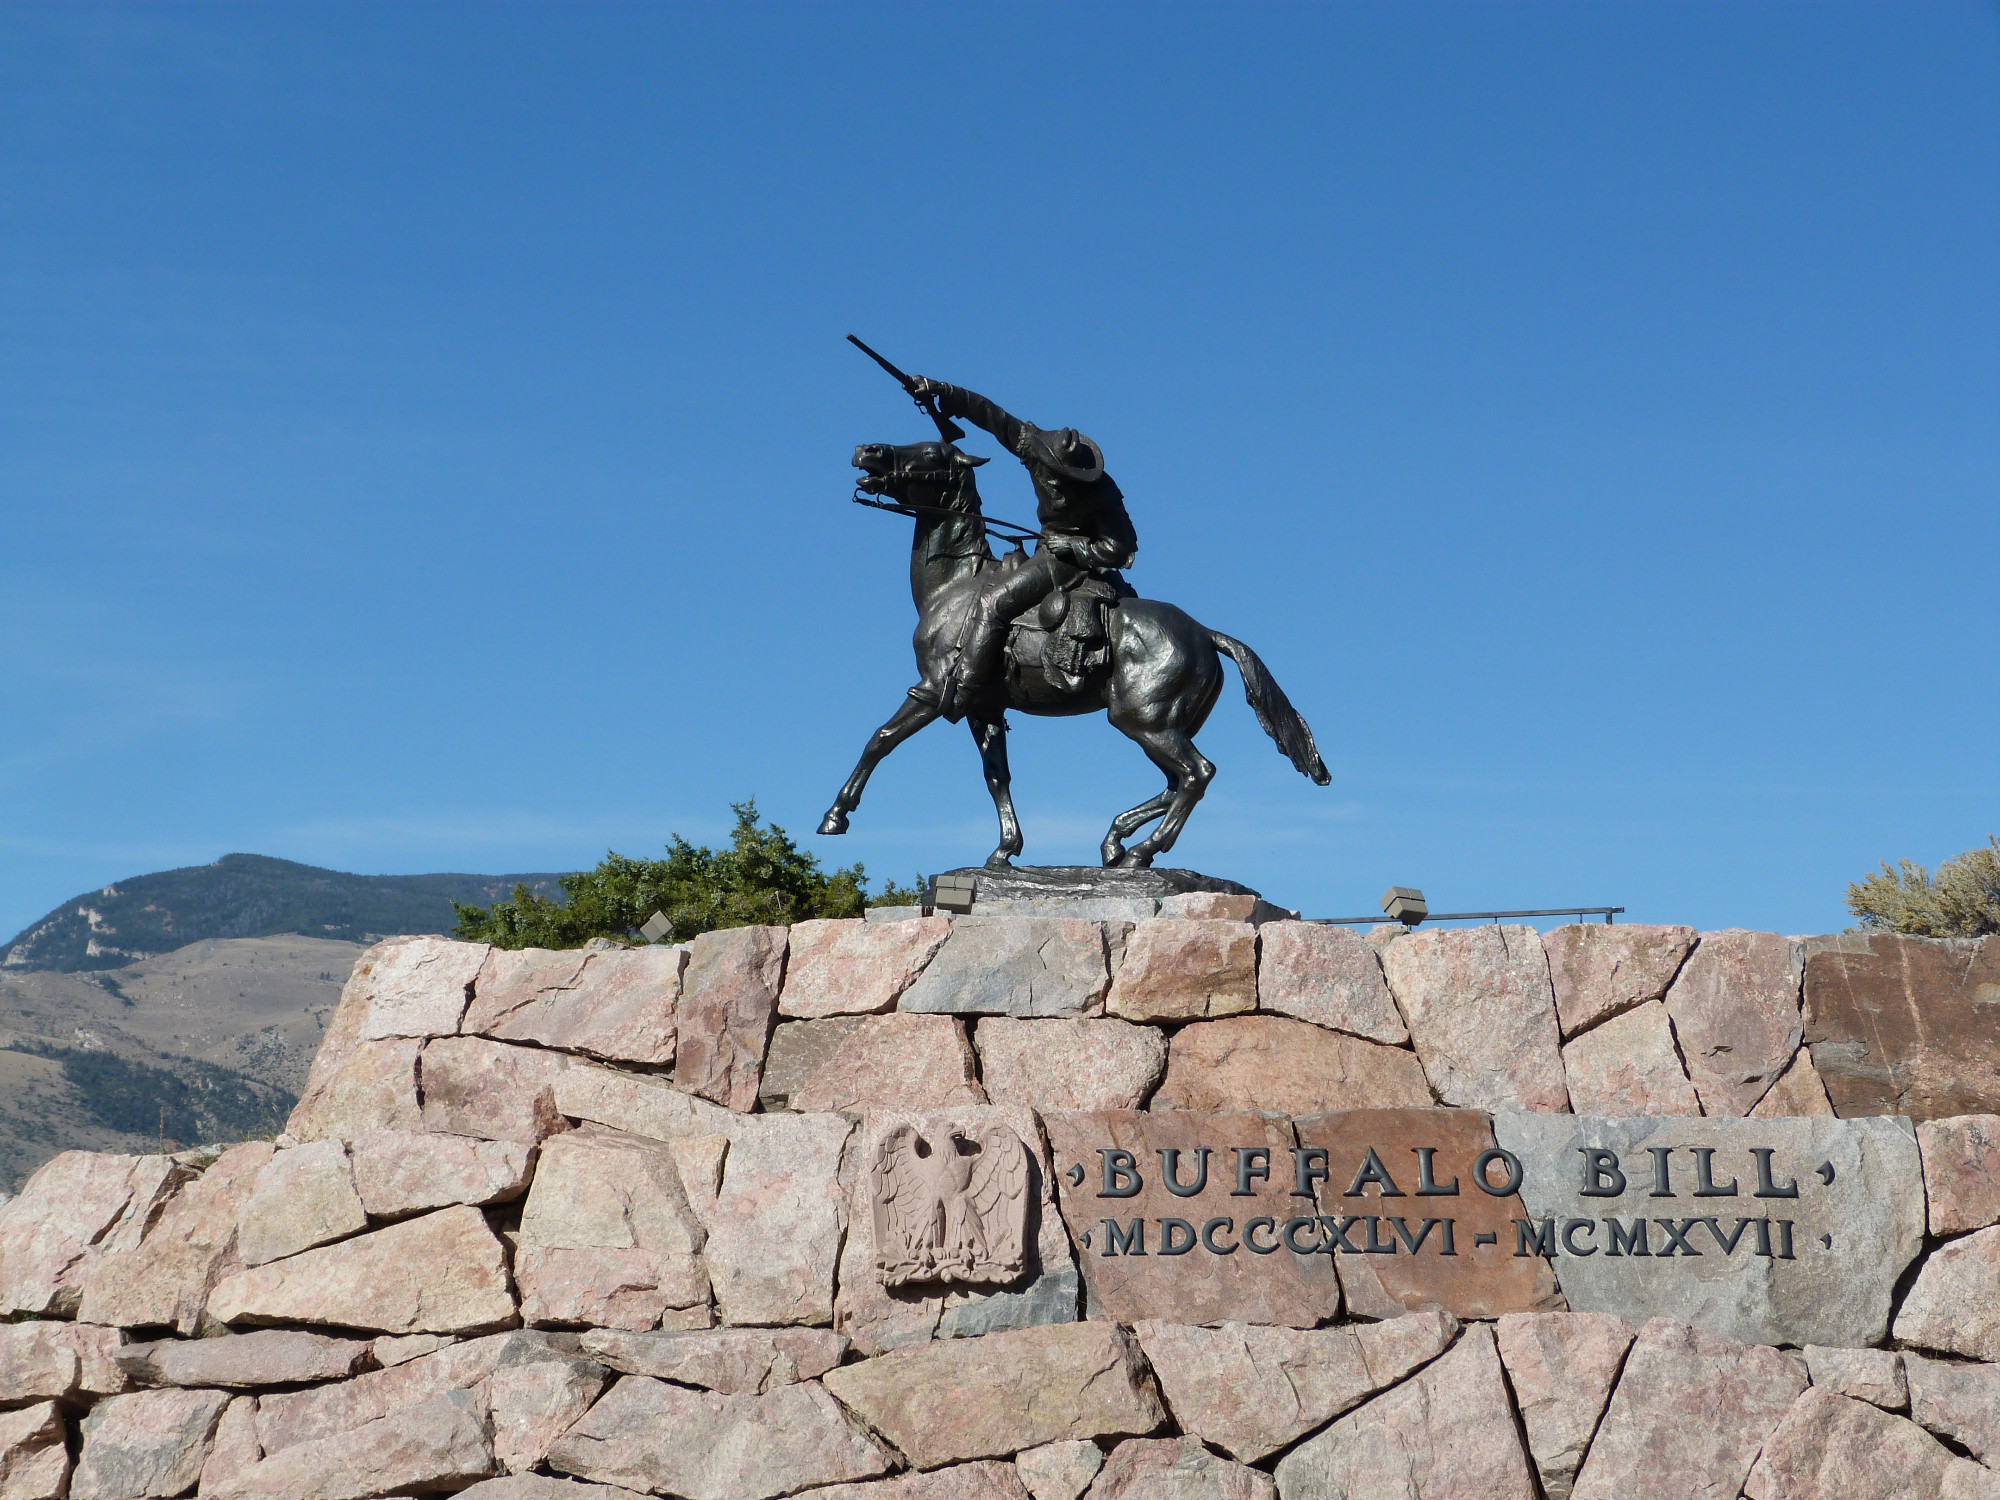 Buffalo Bill – The Scout is a bronze statue of a mounted rider outside the Buffalo Bill Historical Center